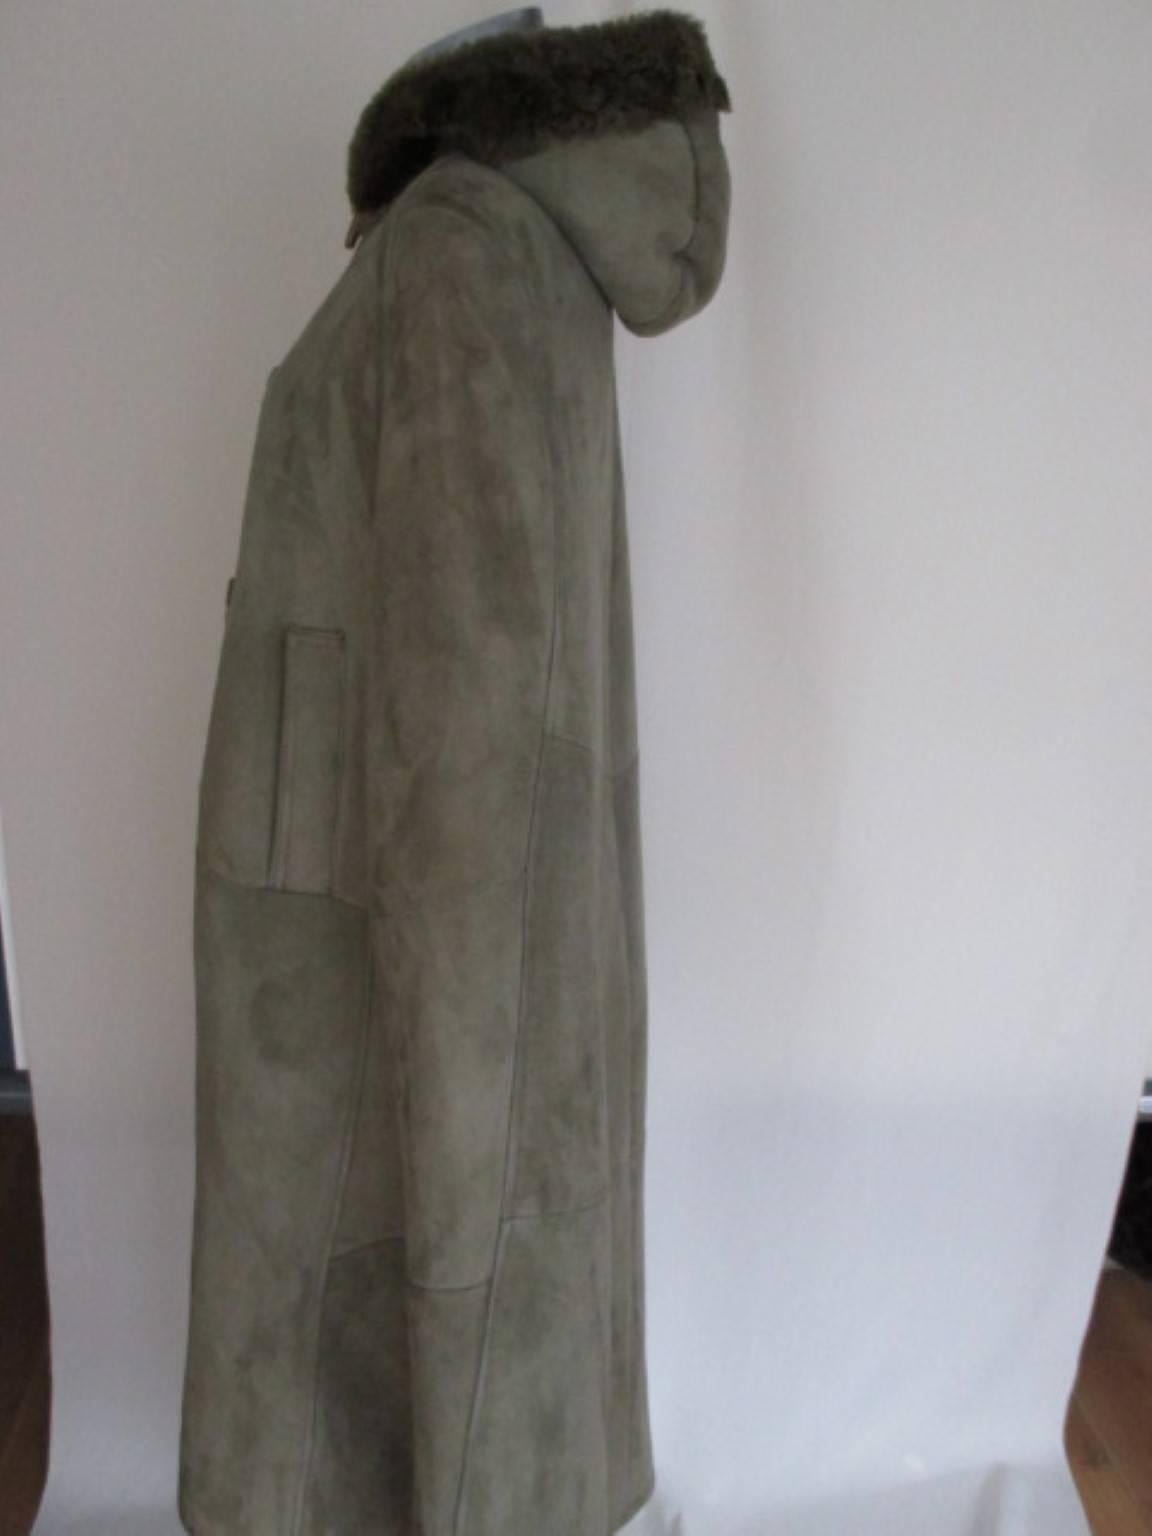 This vintage hooded suede leather is very warm to wear.

We offer more shearling/fur items, view our frontstore.

Details:
4 closing hooks, a hood
Color is soft green.
The cape is in vintage fair condition and has wear of use issues at the